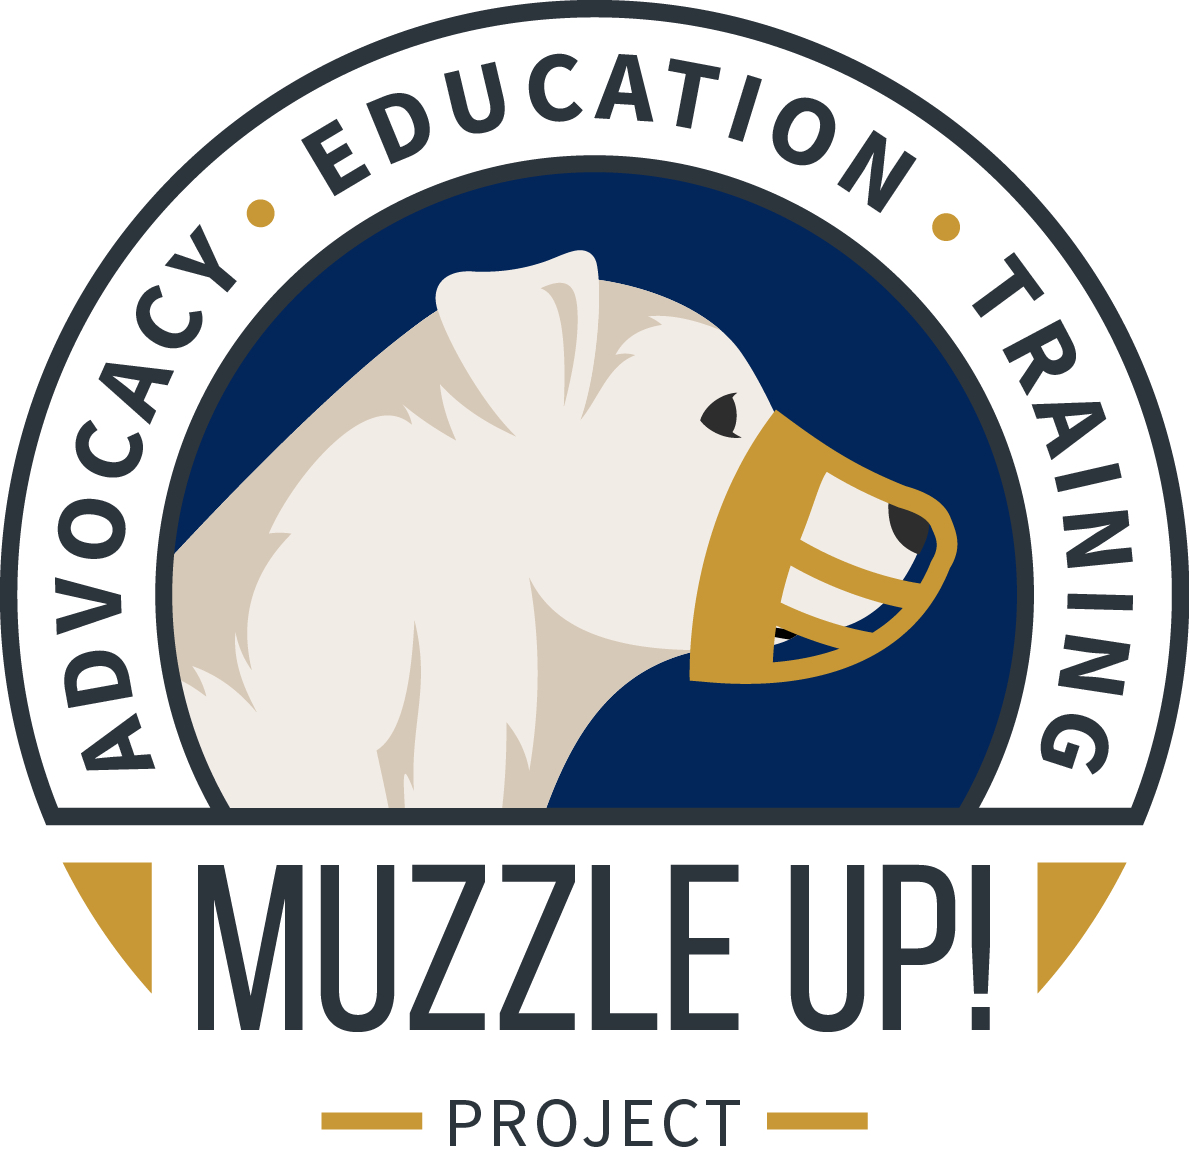 The Muzzle Up! Project